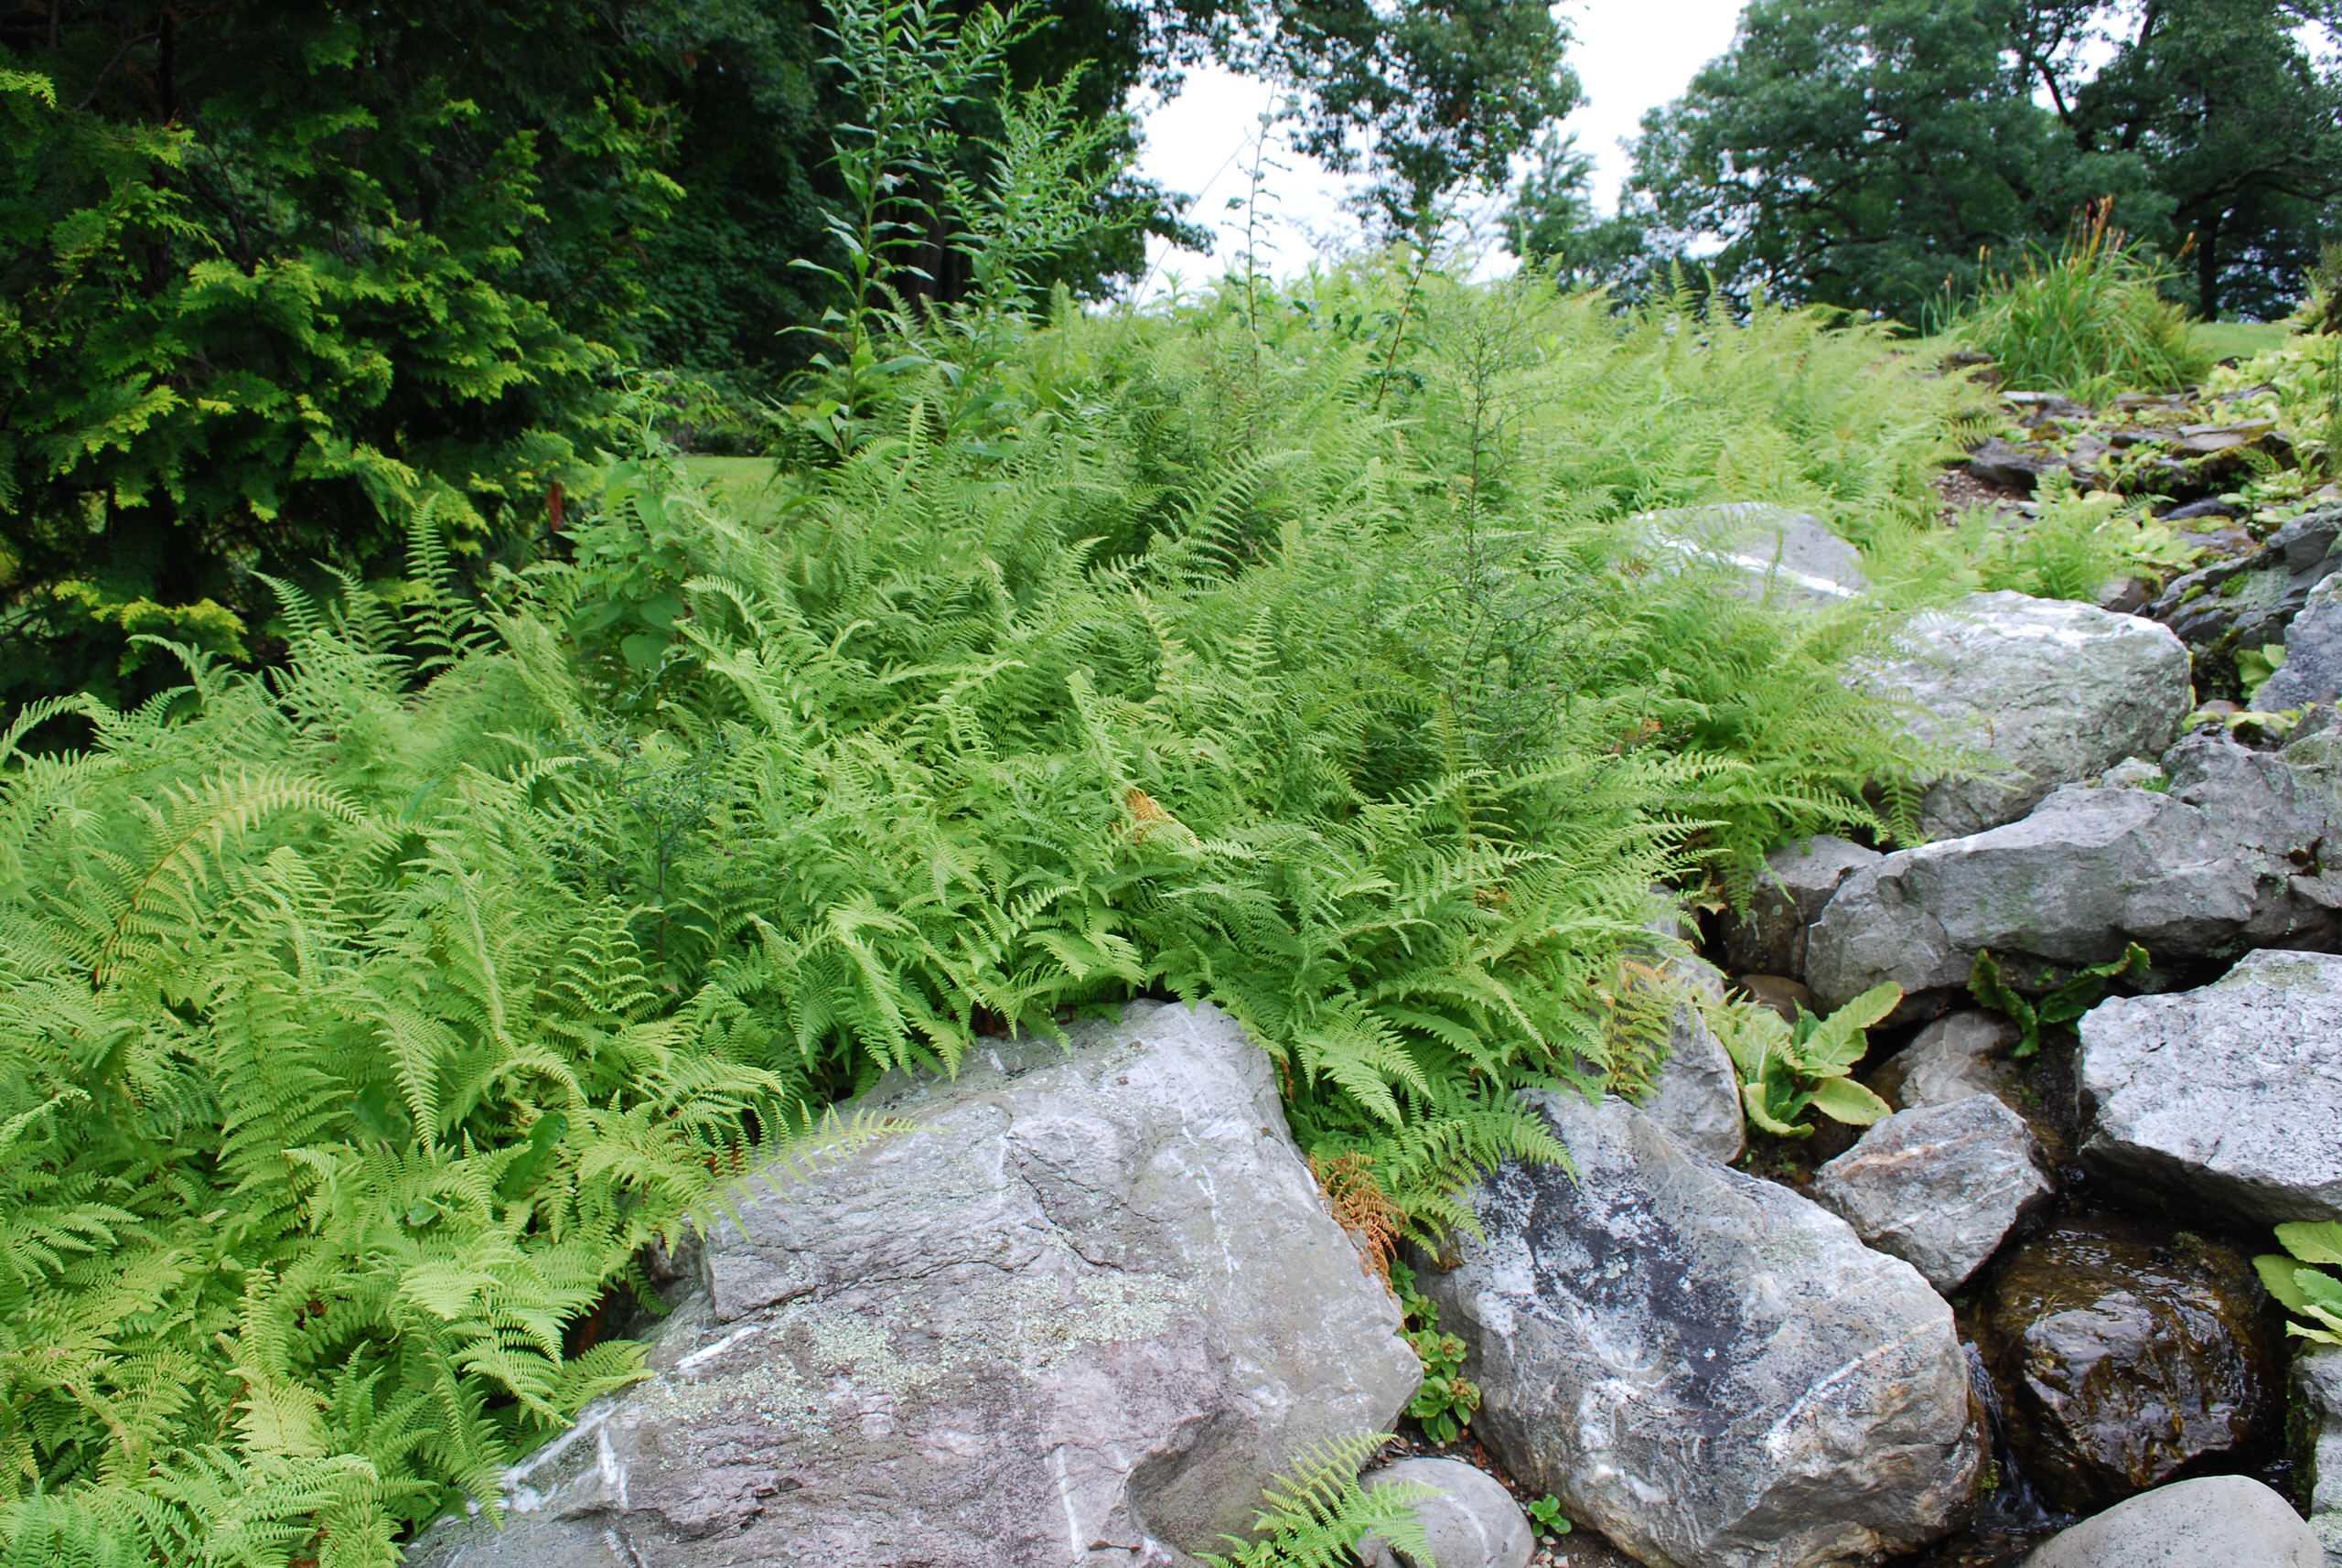 Hayscented Ferns and Boulders at Innisfree, NY